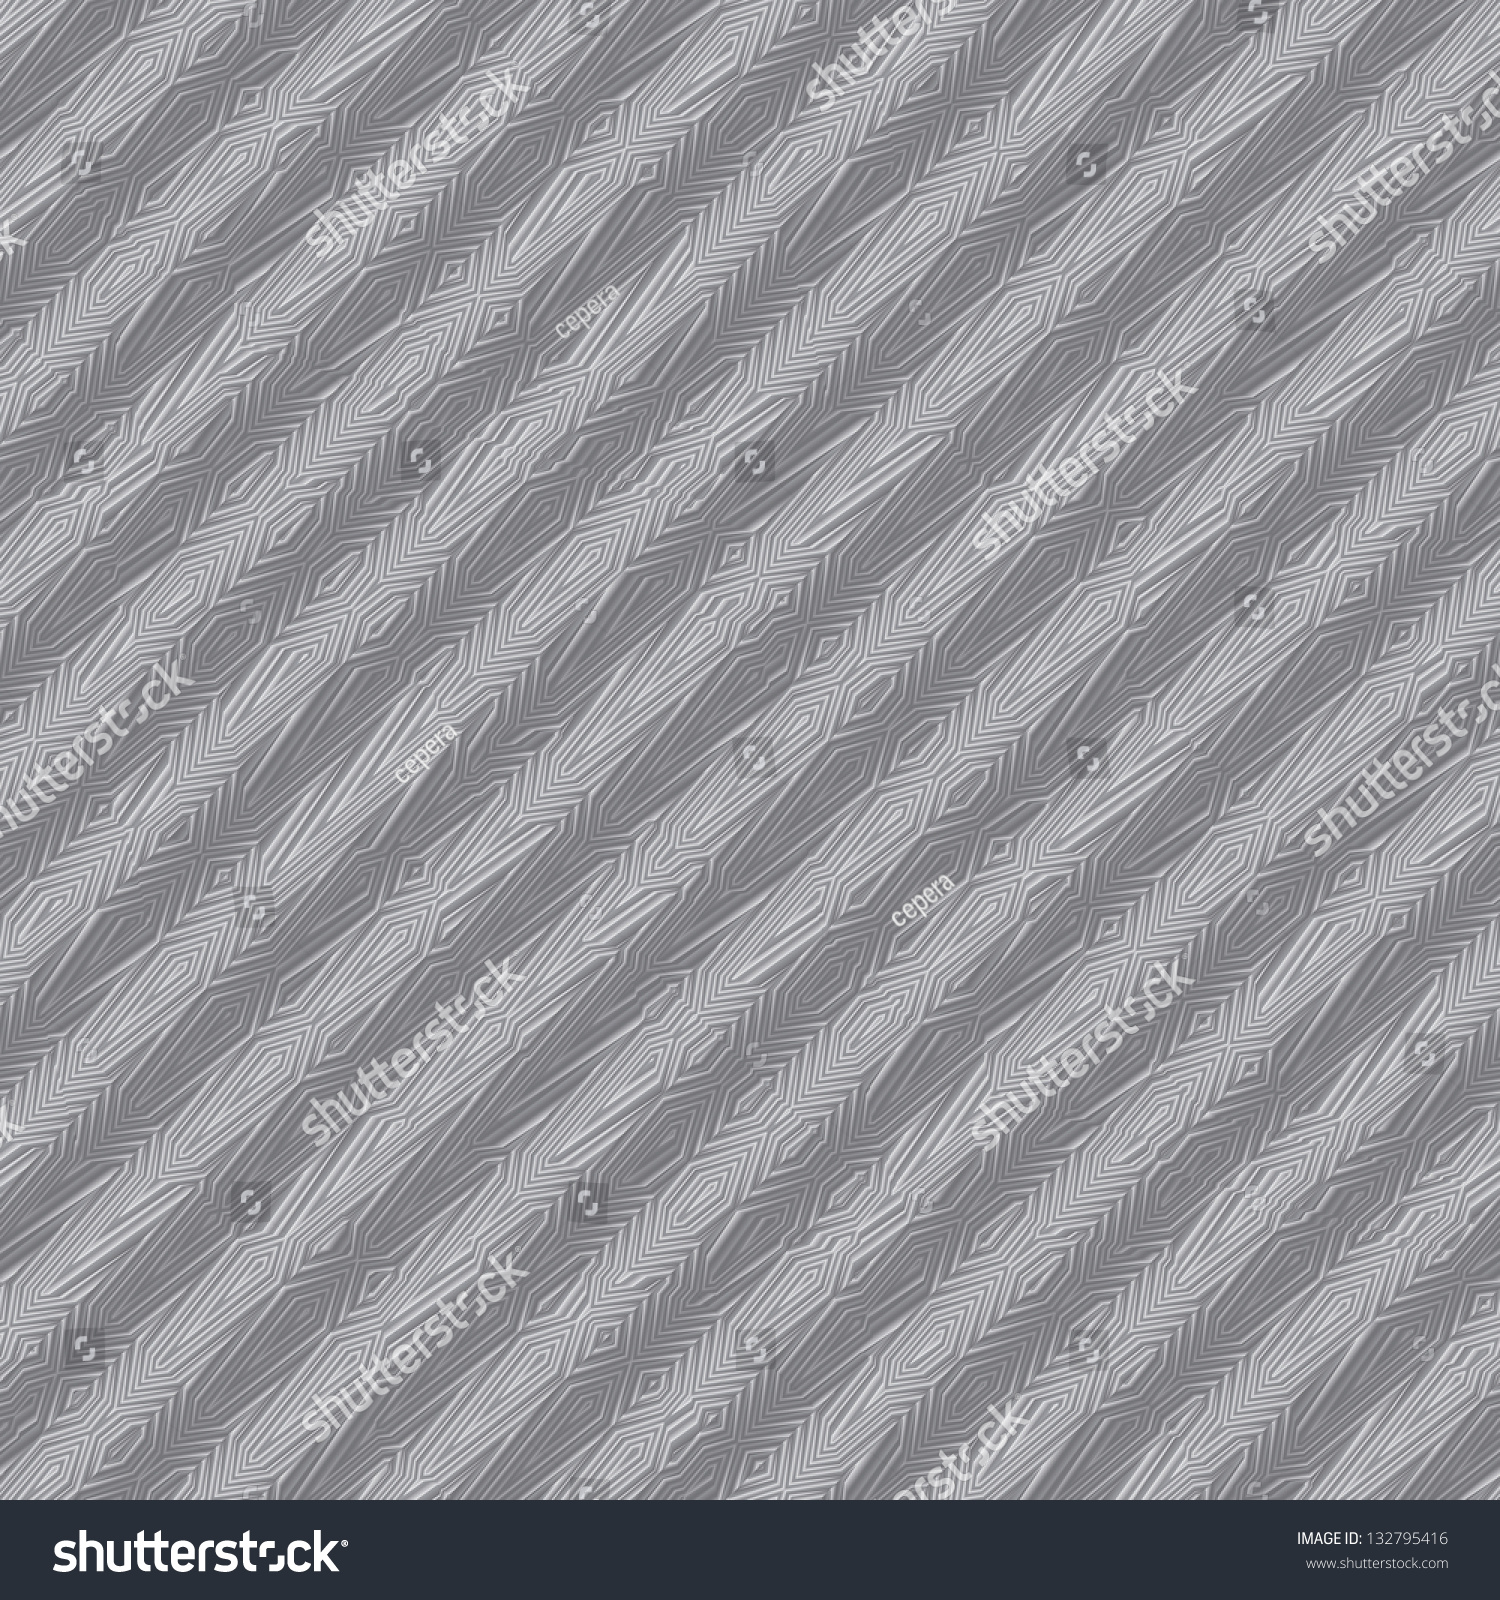 Abstract Crumpled Metal Ornate Striped Texture Stock Illustration ...